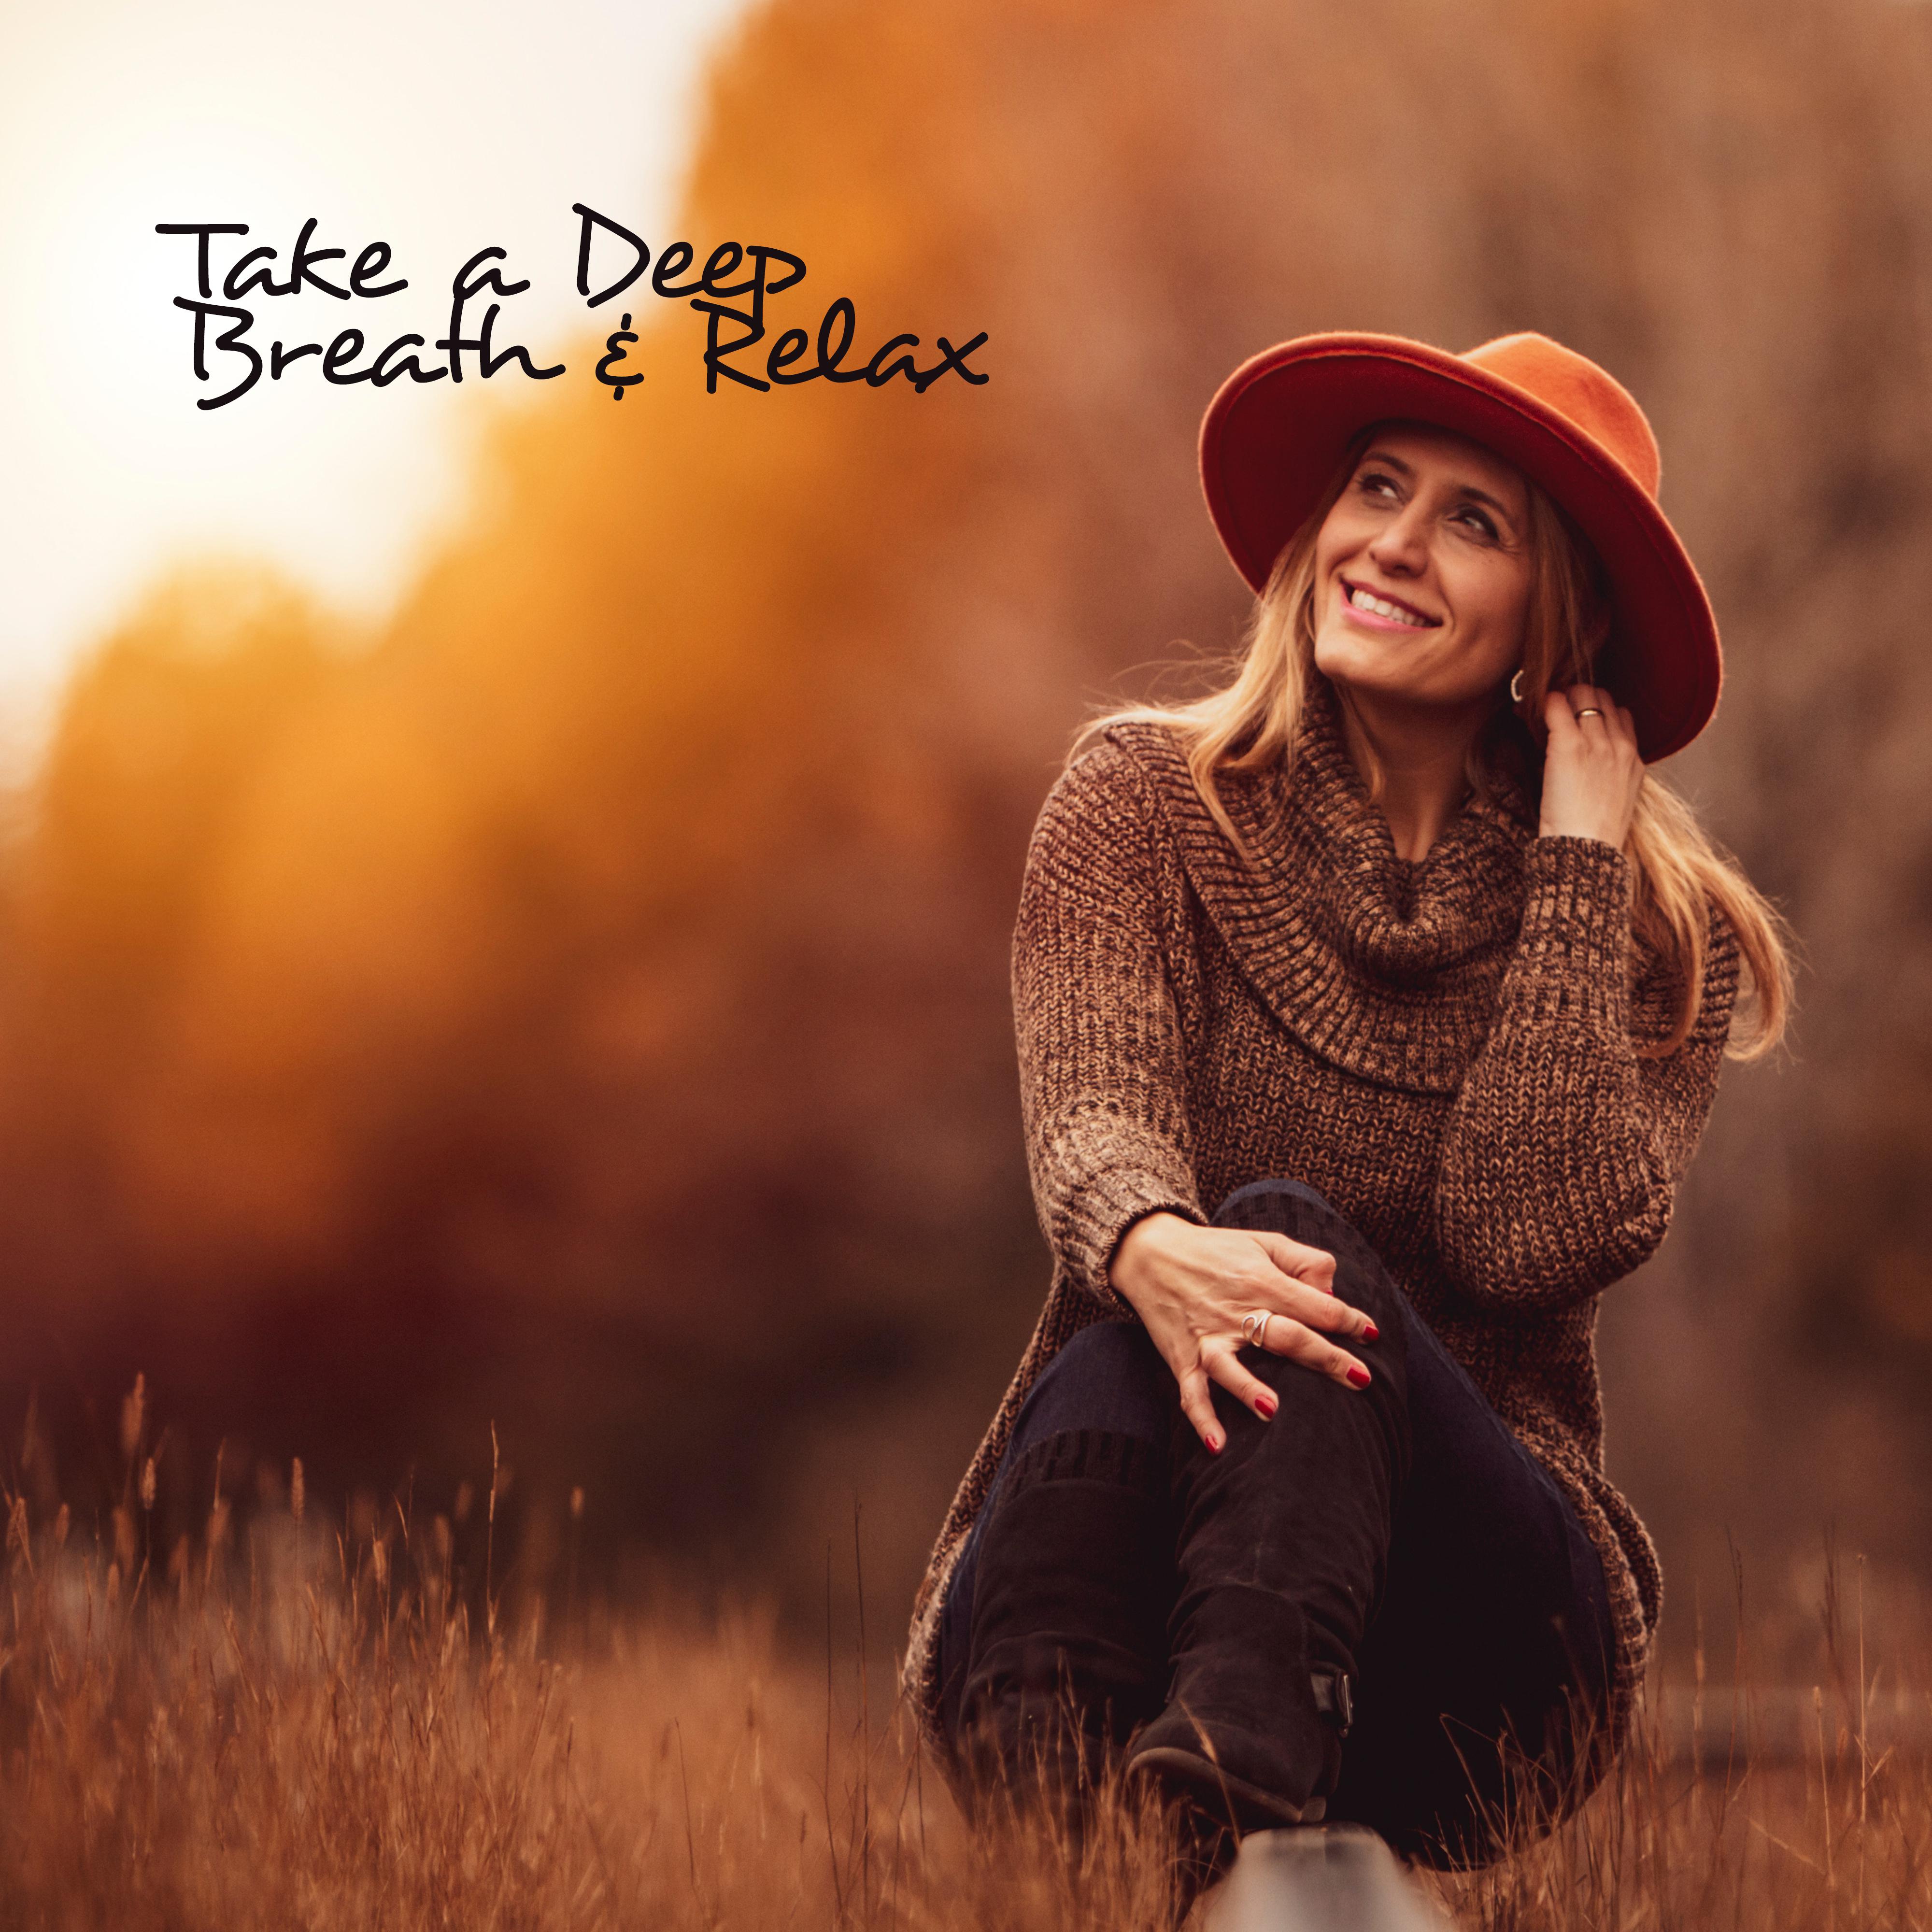 Take a Deep Breath  Relax  New Age Meditation  Relaxing Music for Calming Down, Stress Relief  Emotional Healing